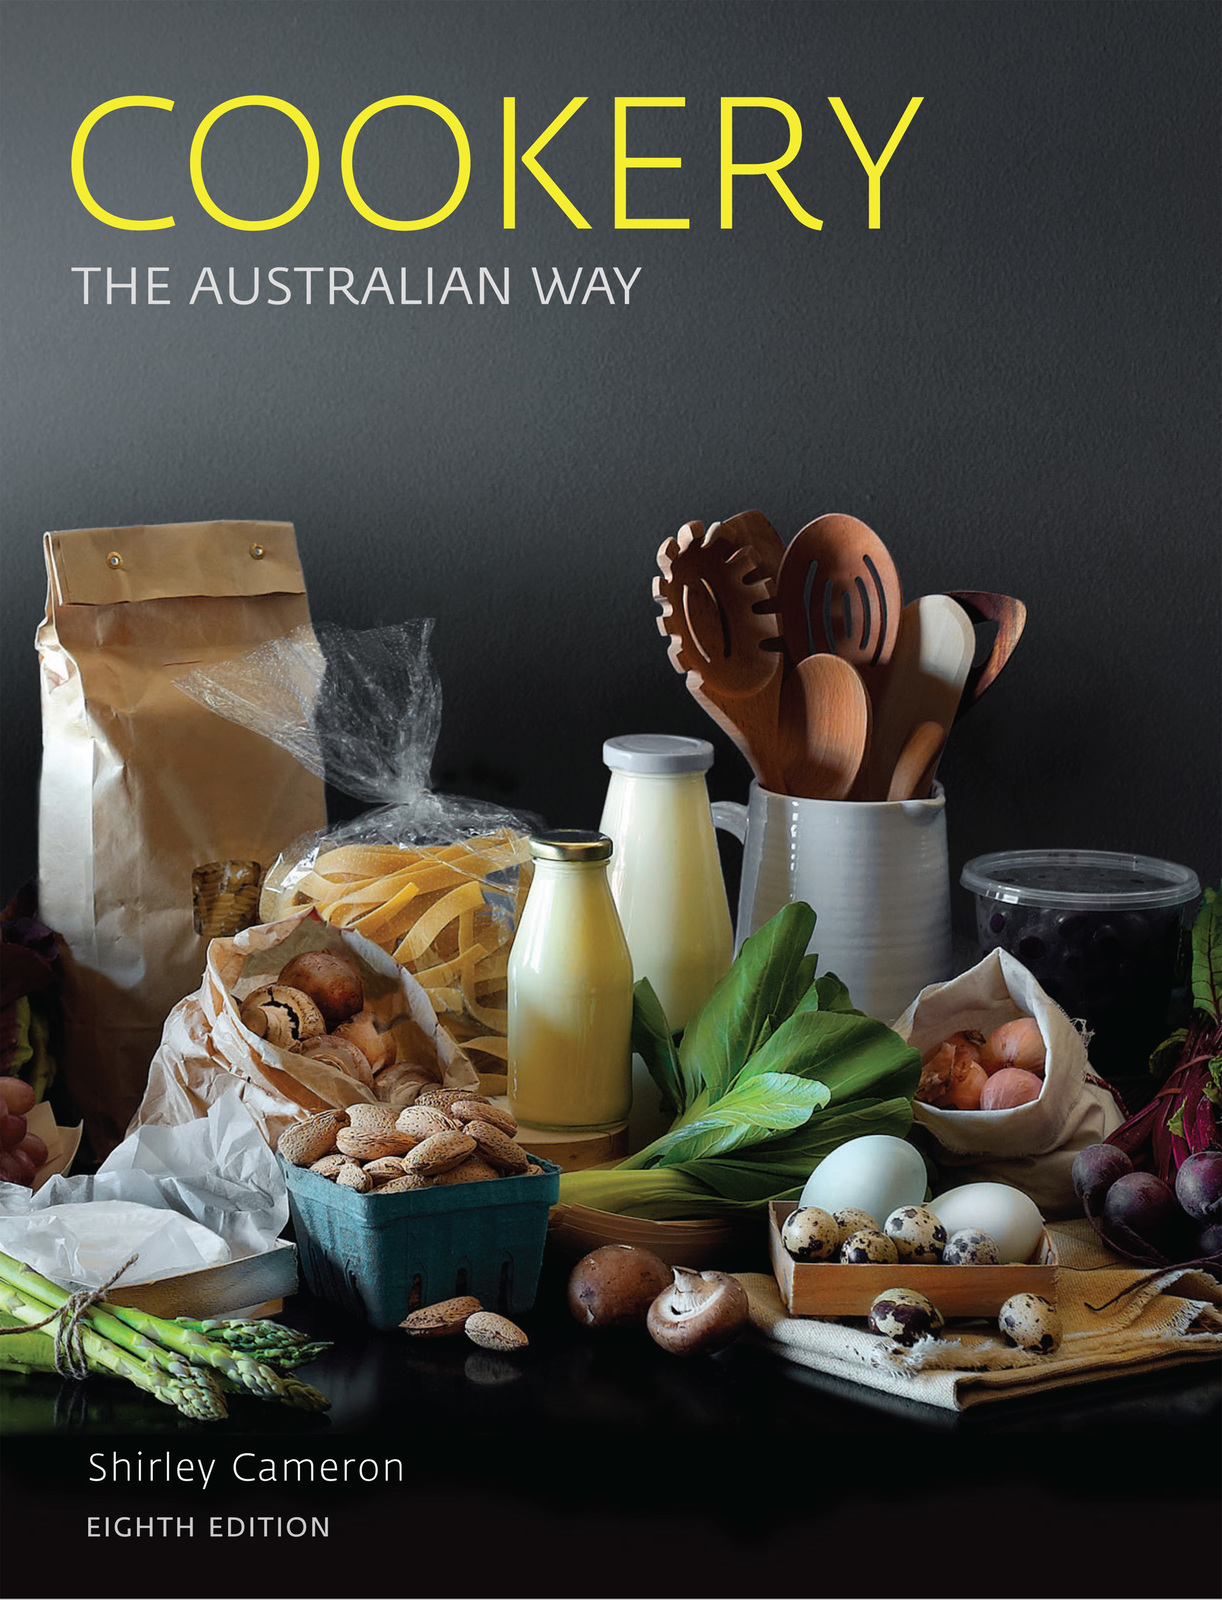 cookery book reviews